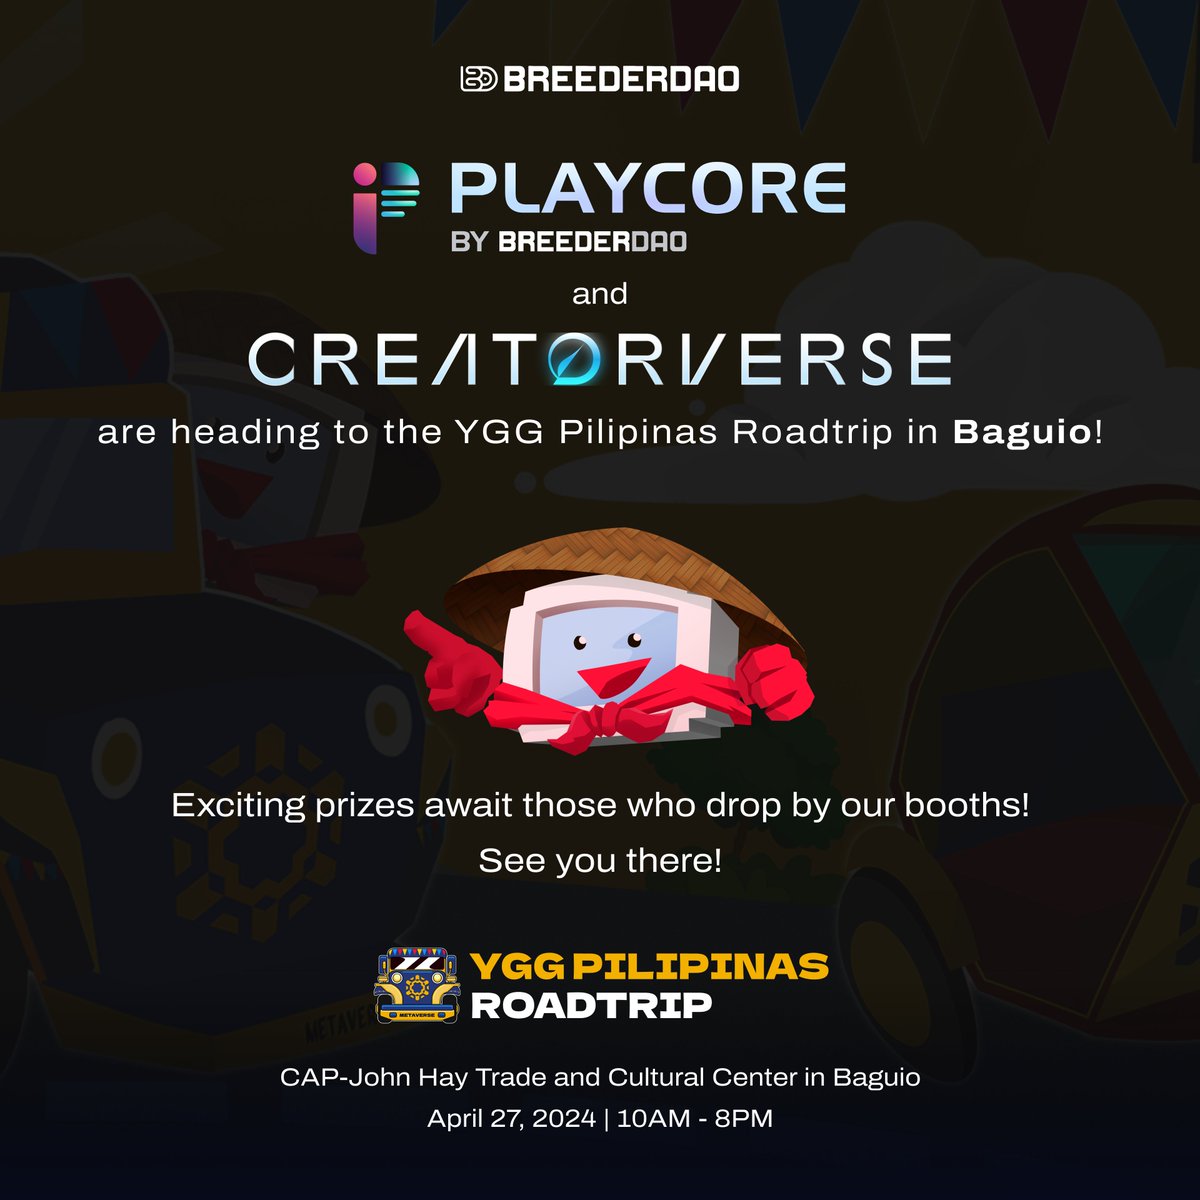 𝗔𝘁𝘁𝗲𝗻𝘁𝗶𝗼𝗻 𝗪𝗲𝗯𝟯 𝗲𝗻𝘁𝗵𝘂𝘀𝗶𝗮𝘀𝘁𝘀 📢❗

Touch grass and join @playcore_io and @creatorverse_gg at the @YGGphroadtrip this coming Saturday in Baguio 🫡

Drop by our booths and get a chance to win amazing gifts we have for you 🎁

We’ll be at the CAP-John Hay Trade